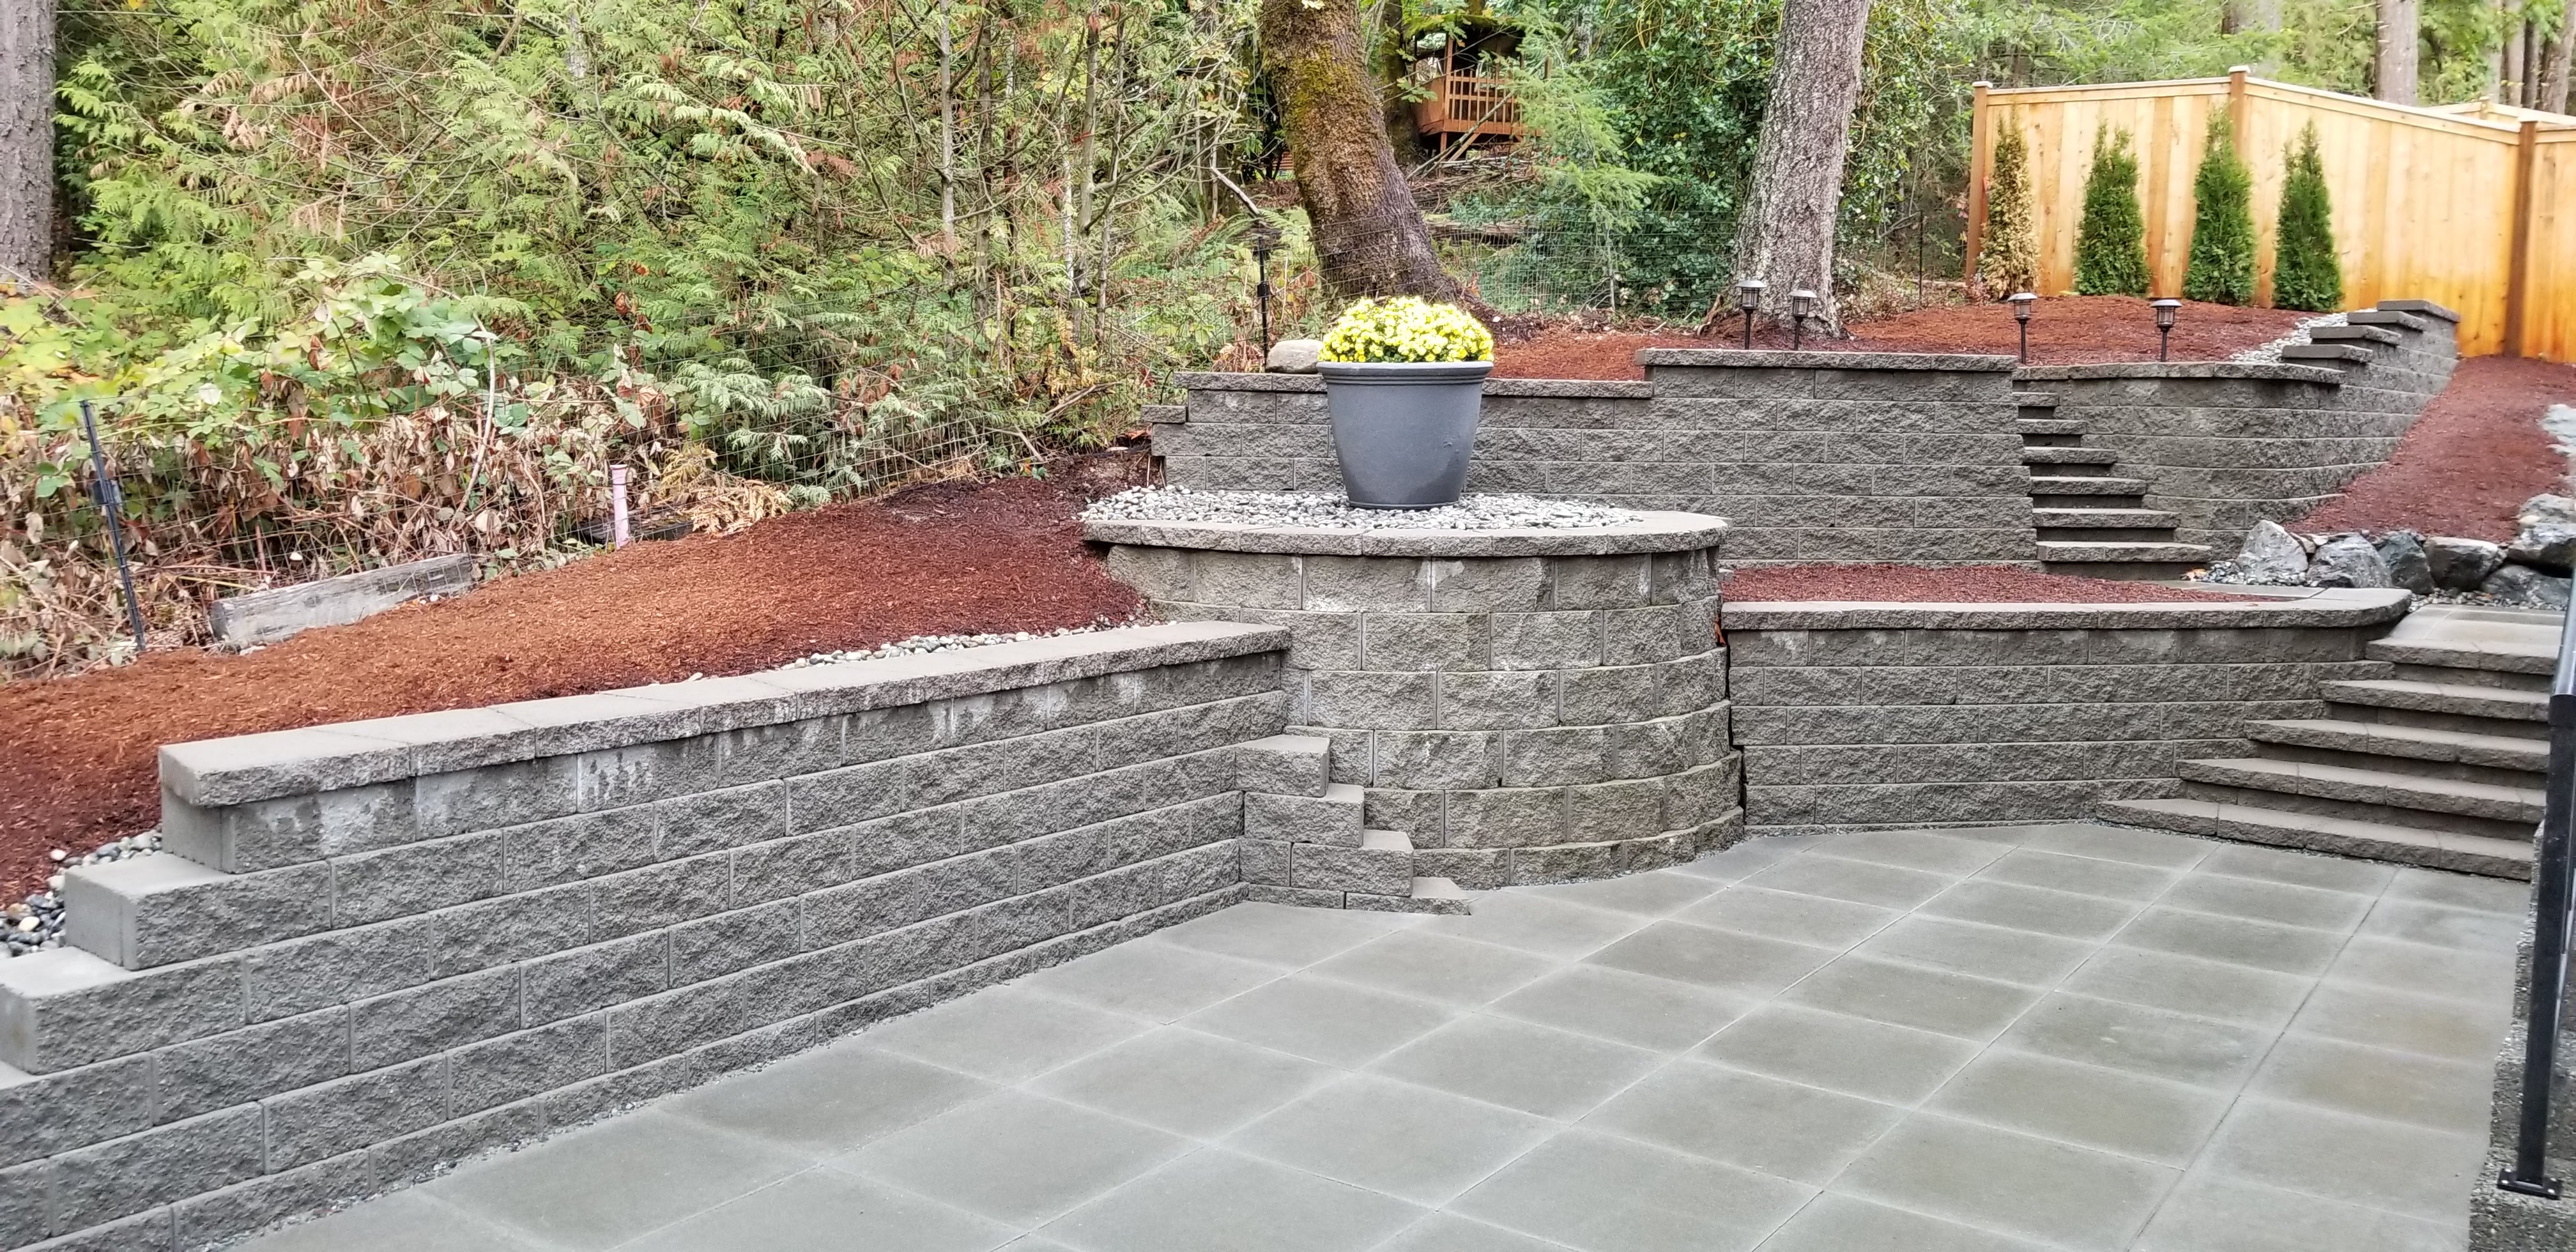 PATIO WITH VANCOUVER BAY SLABS GRAY AND RETAINING WALLS WITH MANORSTONE BLOCKS GRAY.